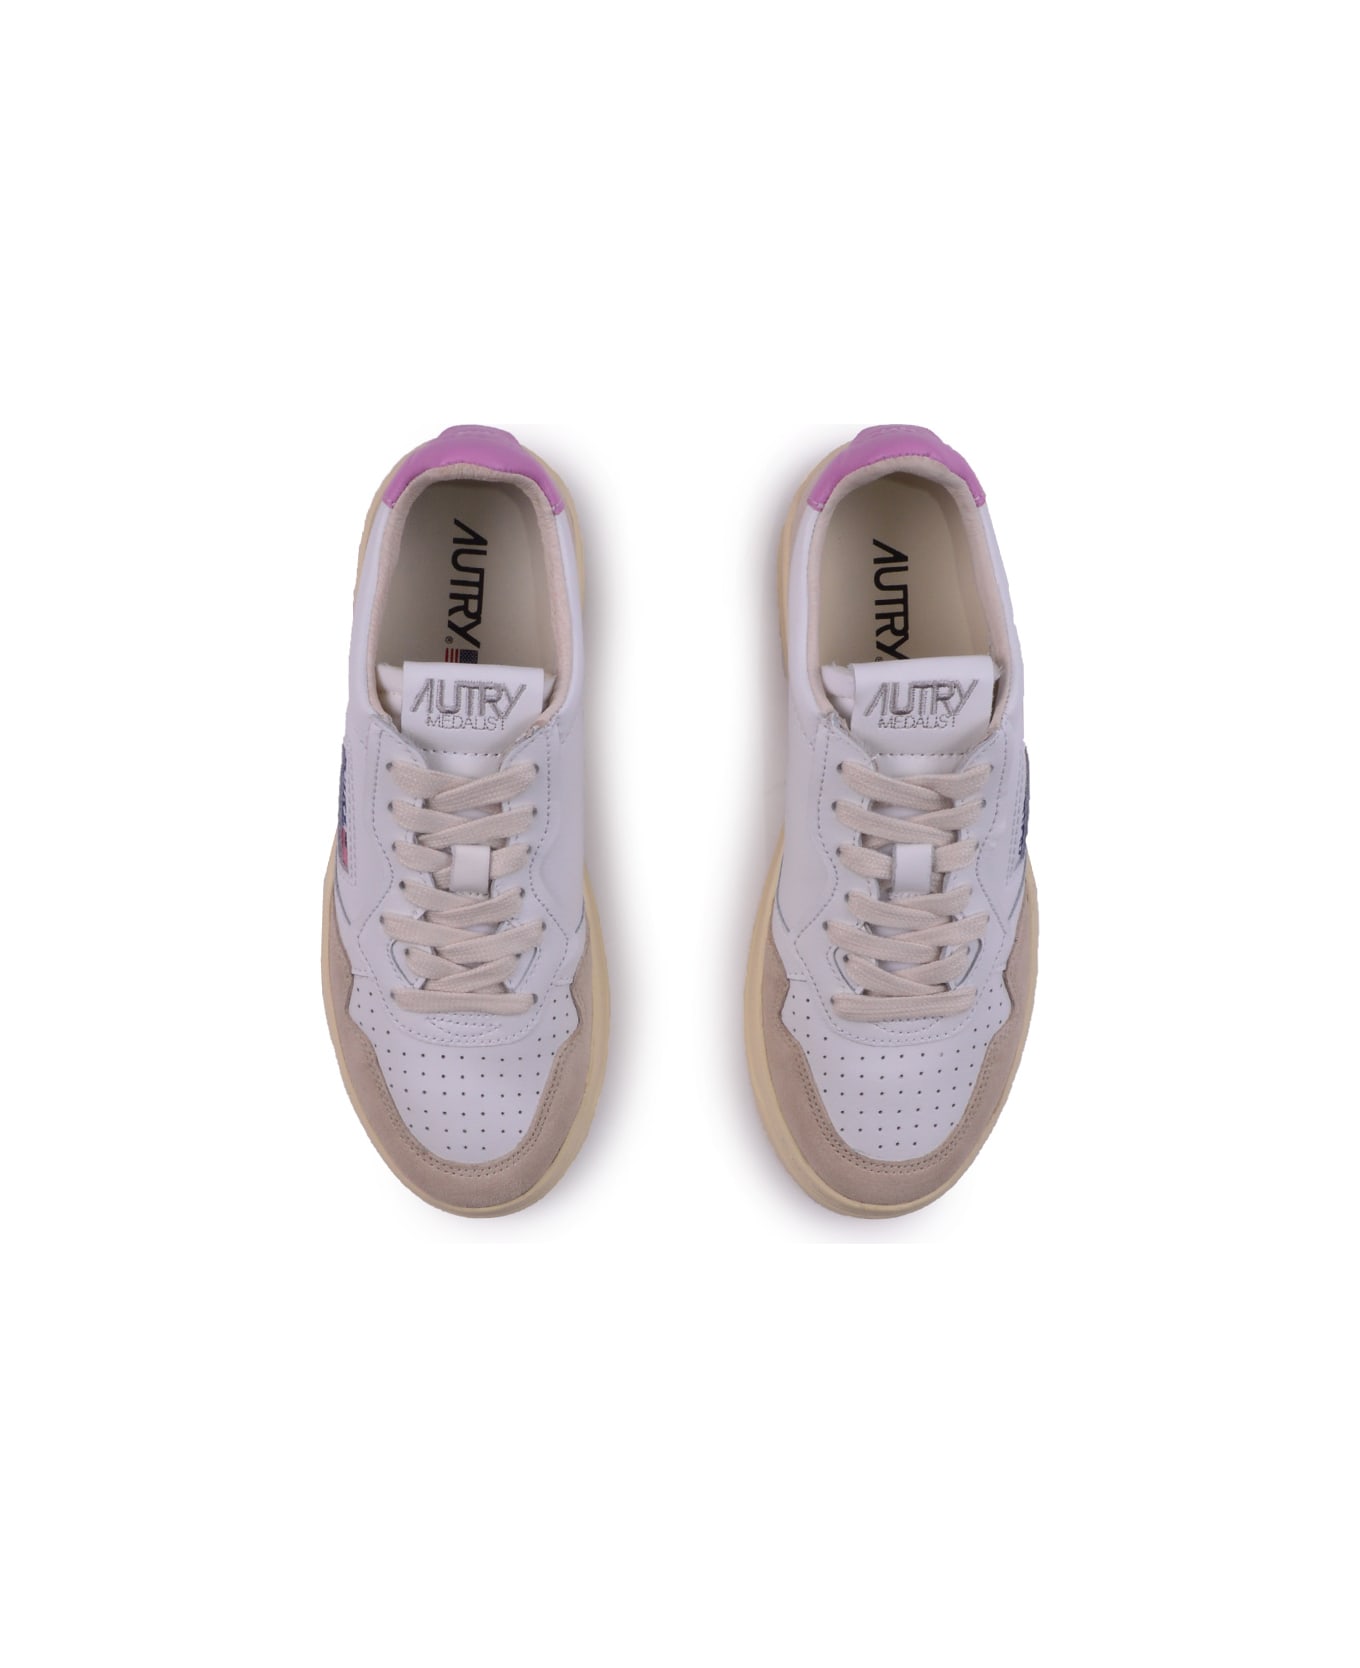 Autry Low Medalist Sneakers - Fucsia